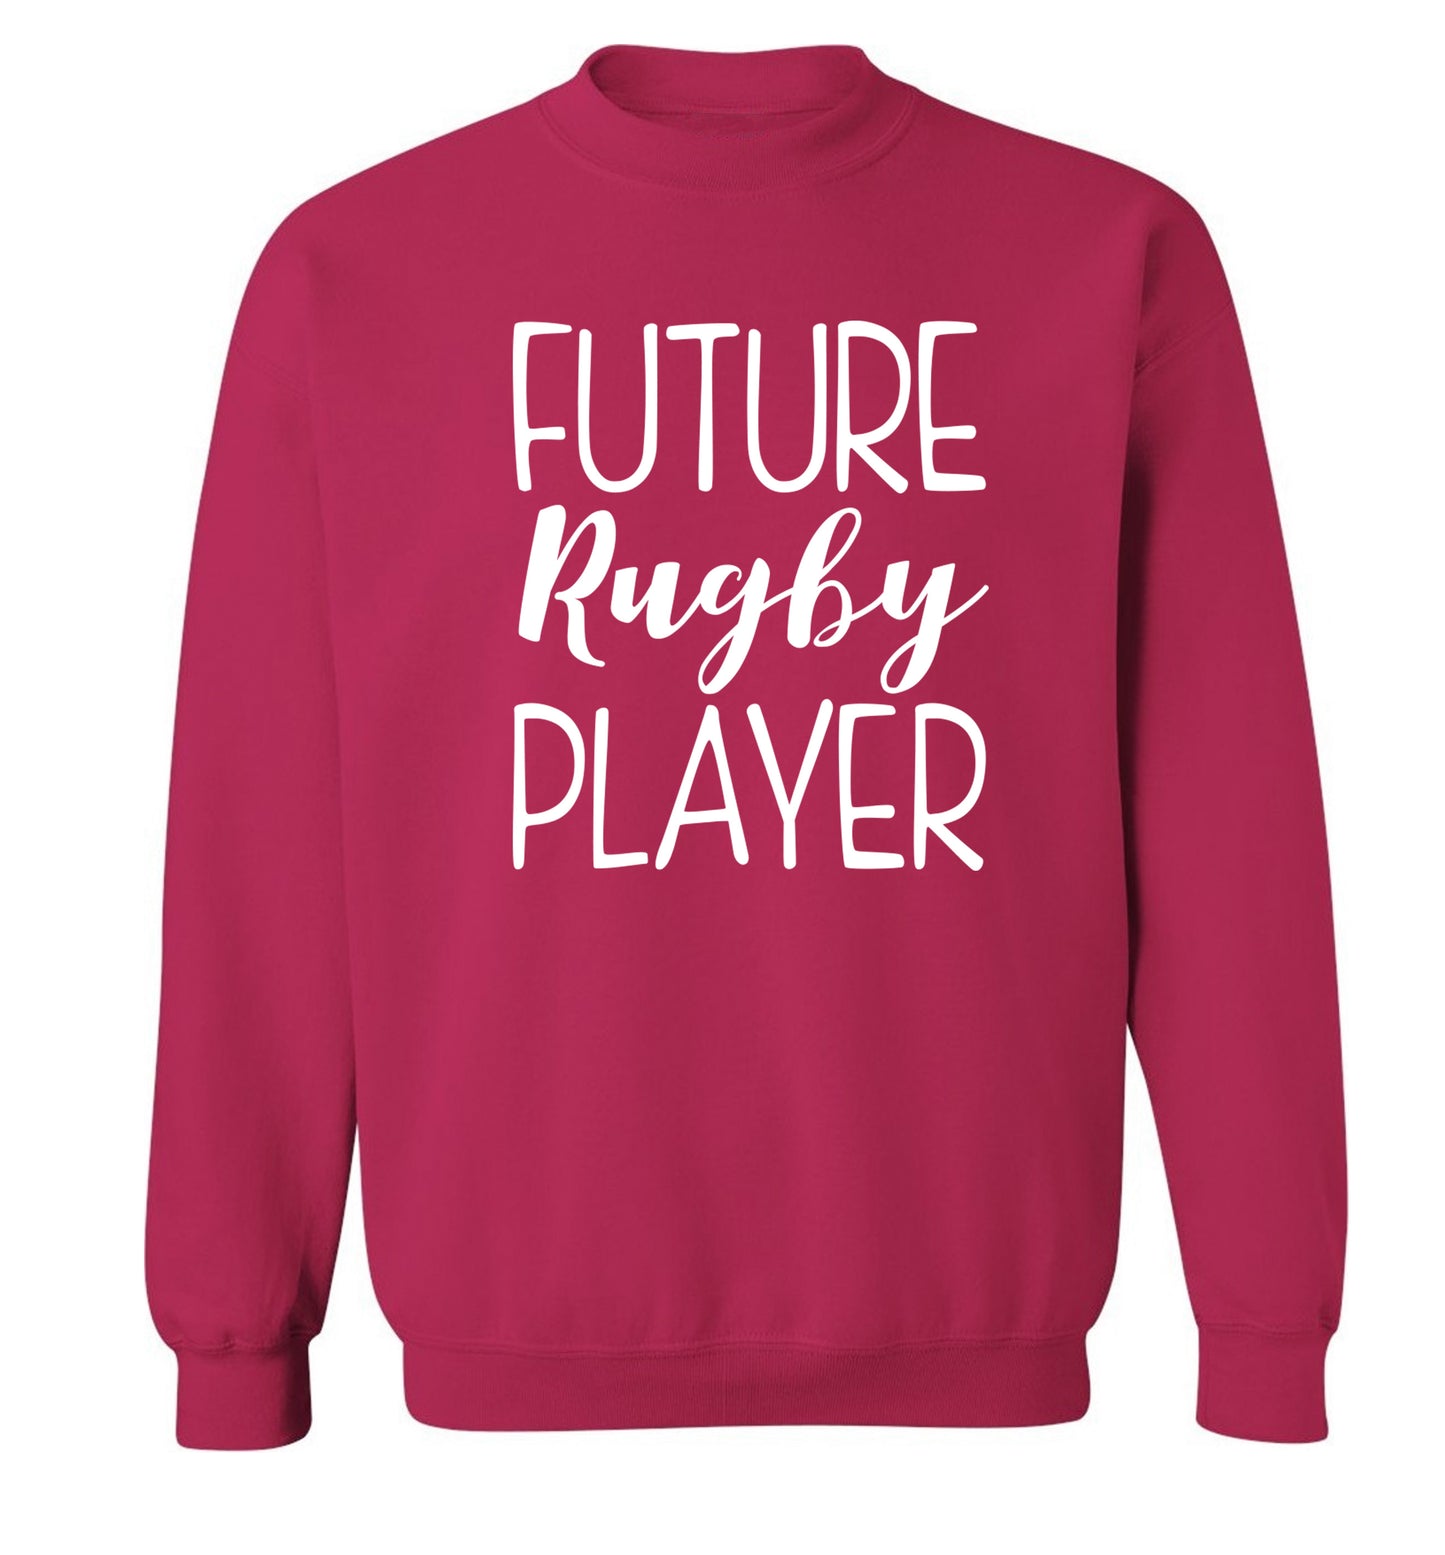 Future rugby player Adult's unisex pink Sweater 2XL